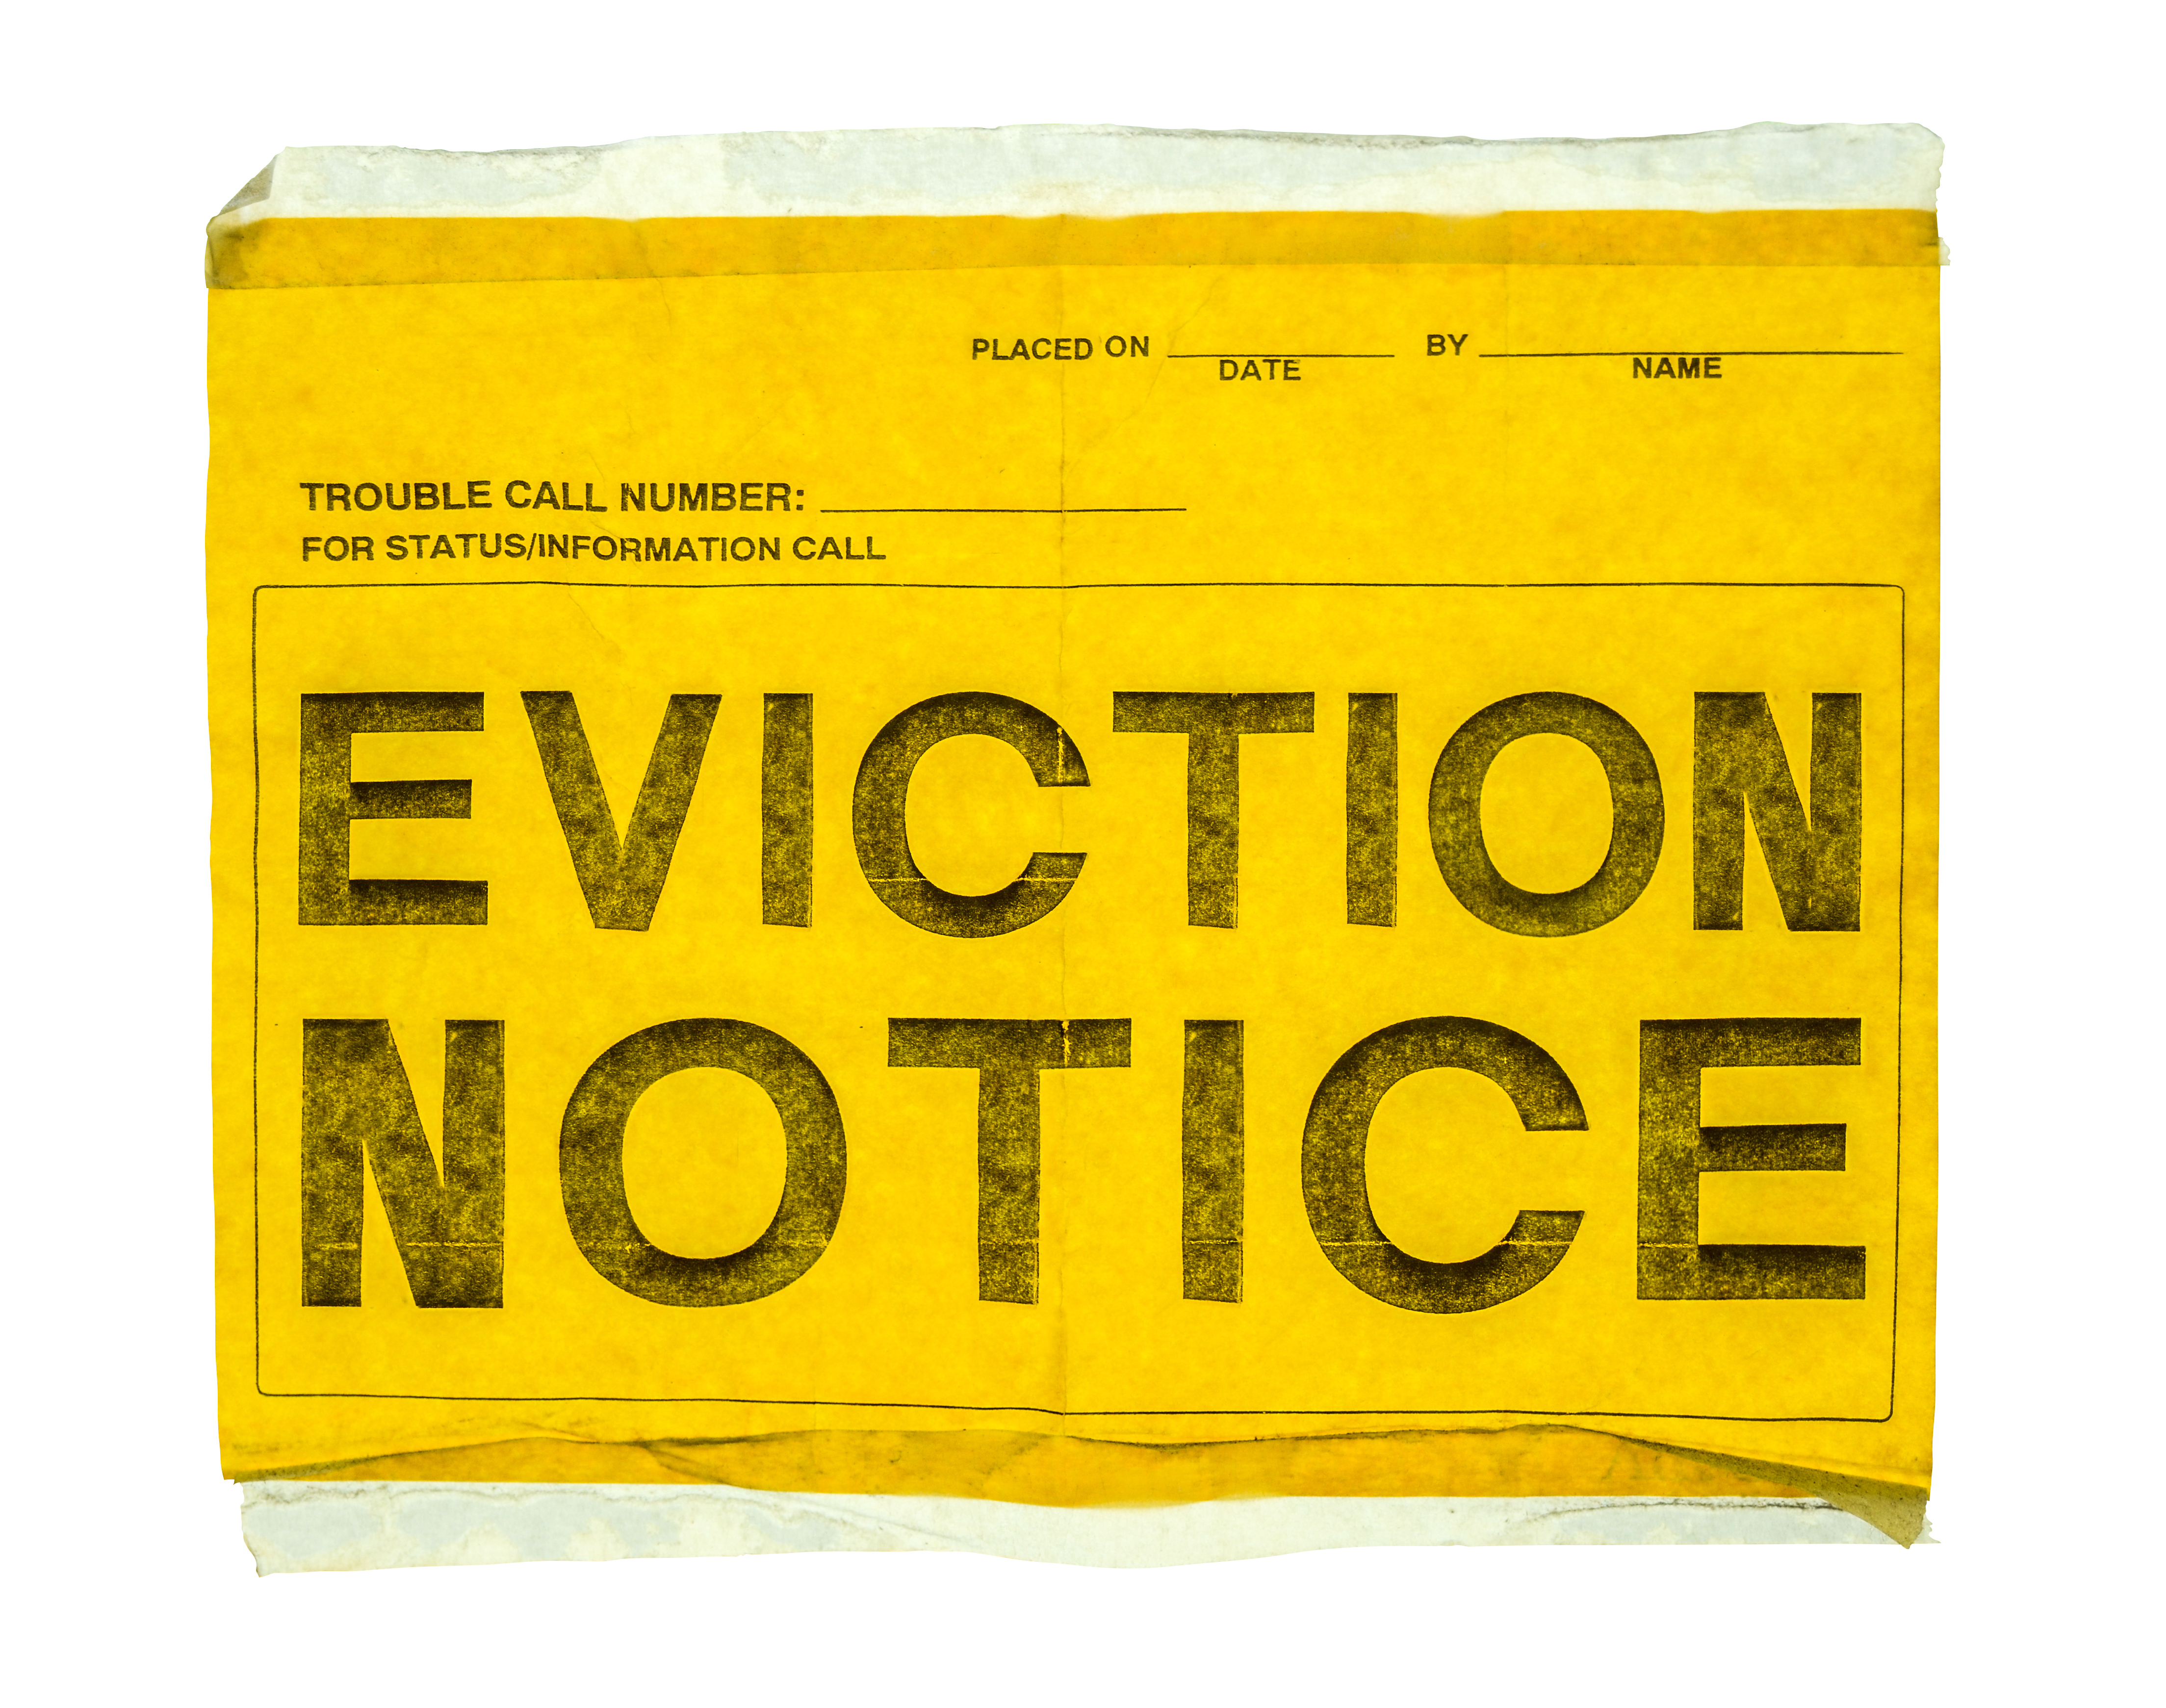 As eviction protections in Virginia expire on June 30, seeking out professional help and resources is a key recommendation for anyone facing eviction.